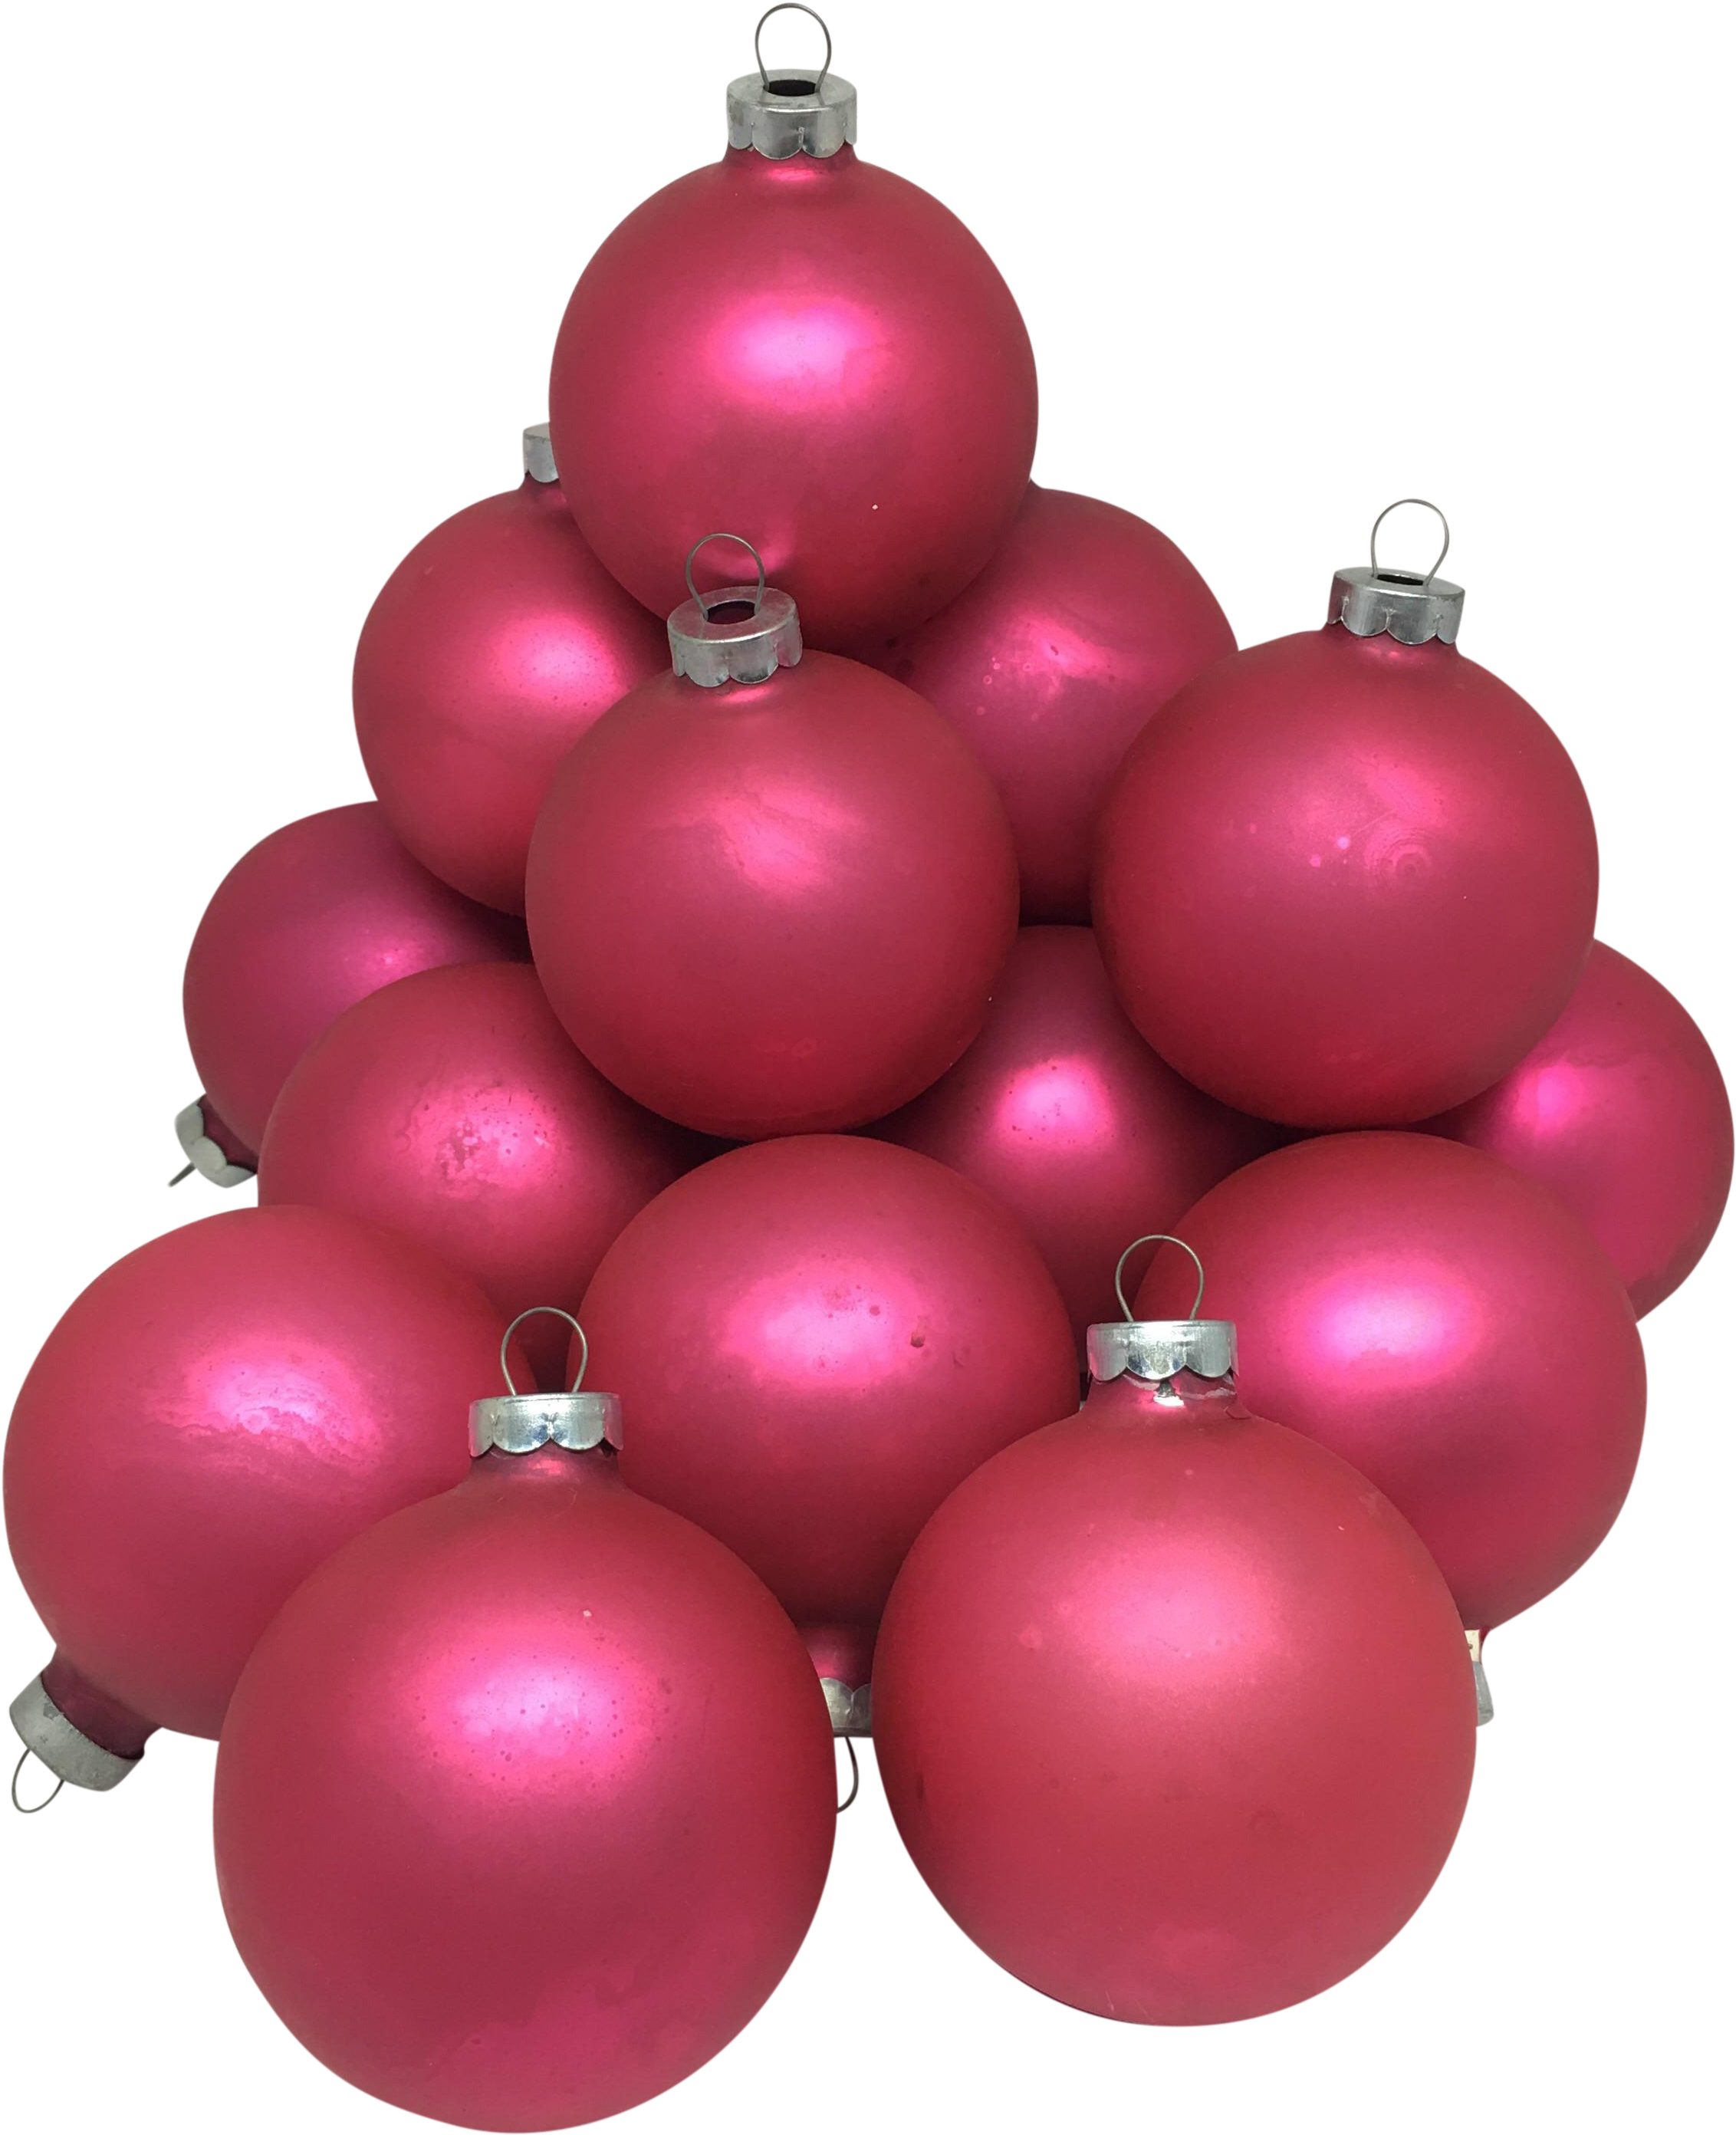 Pink Christmas Ornaments PNG Image High Quality PNG Image